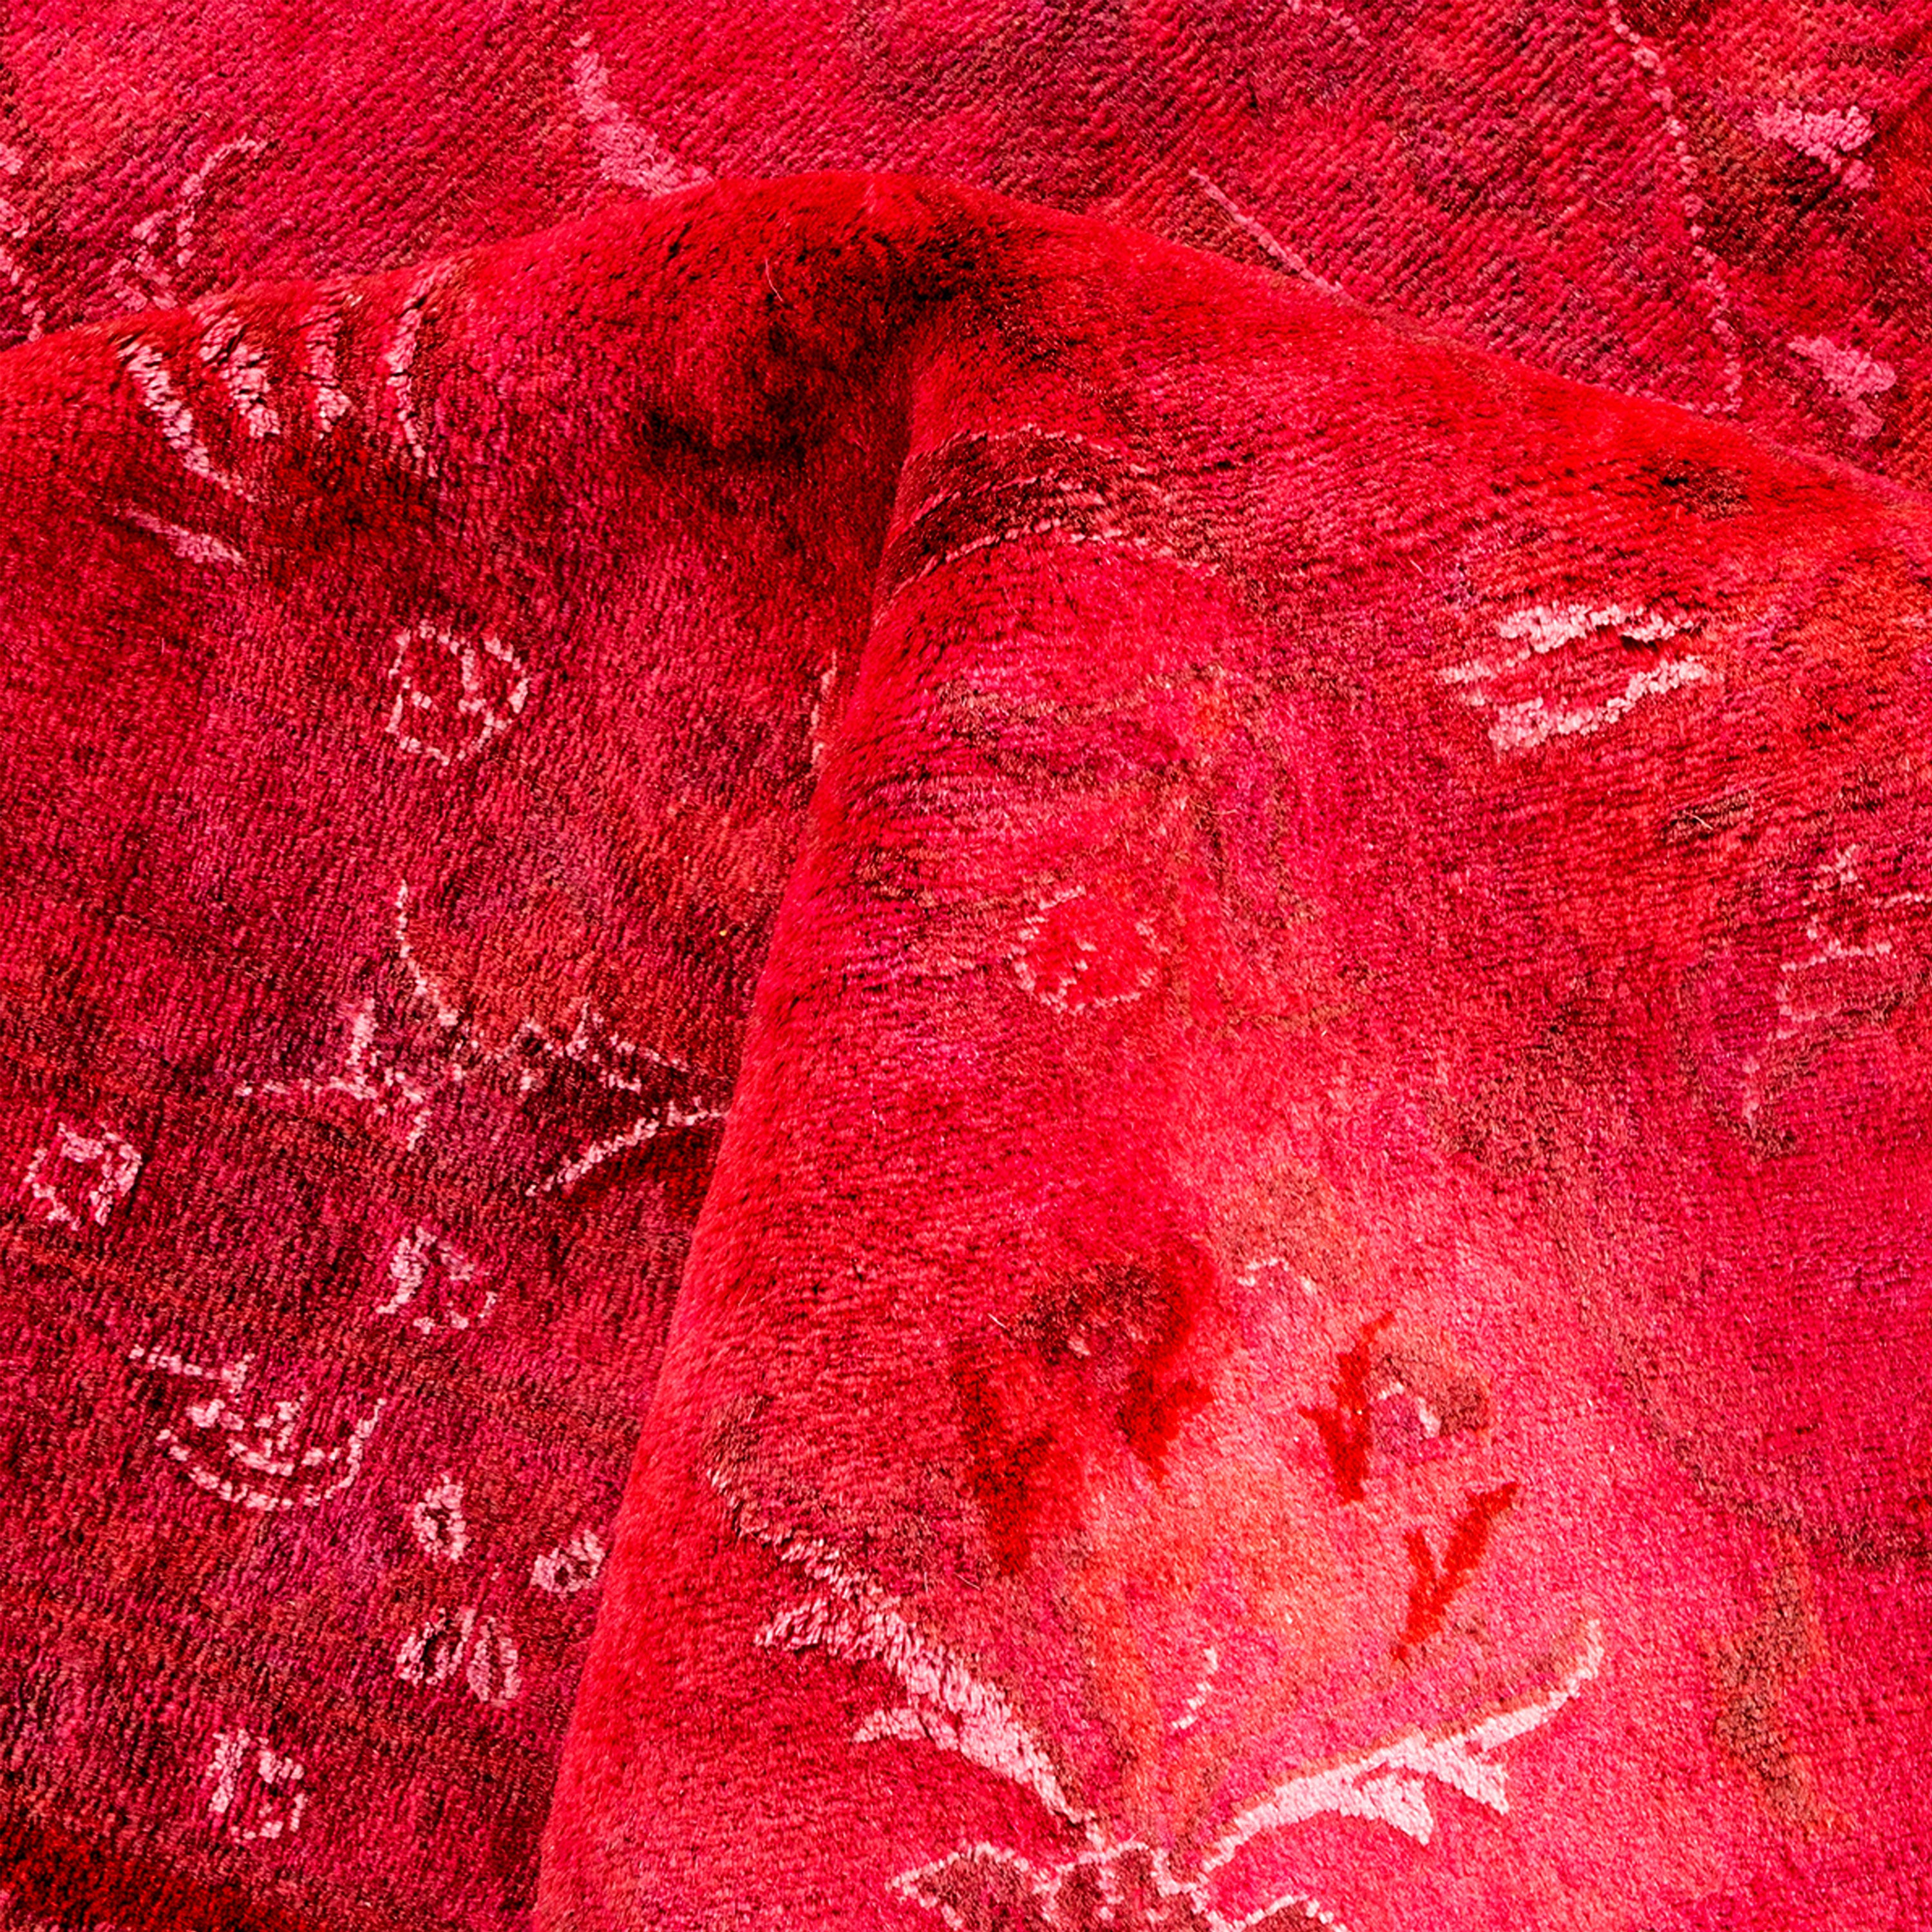 Pink Overdyed Wool Rug - 9' 1" x 12' 4"